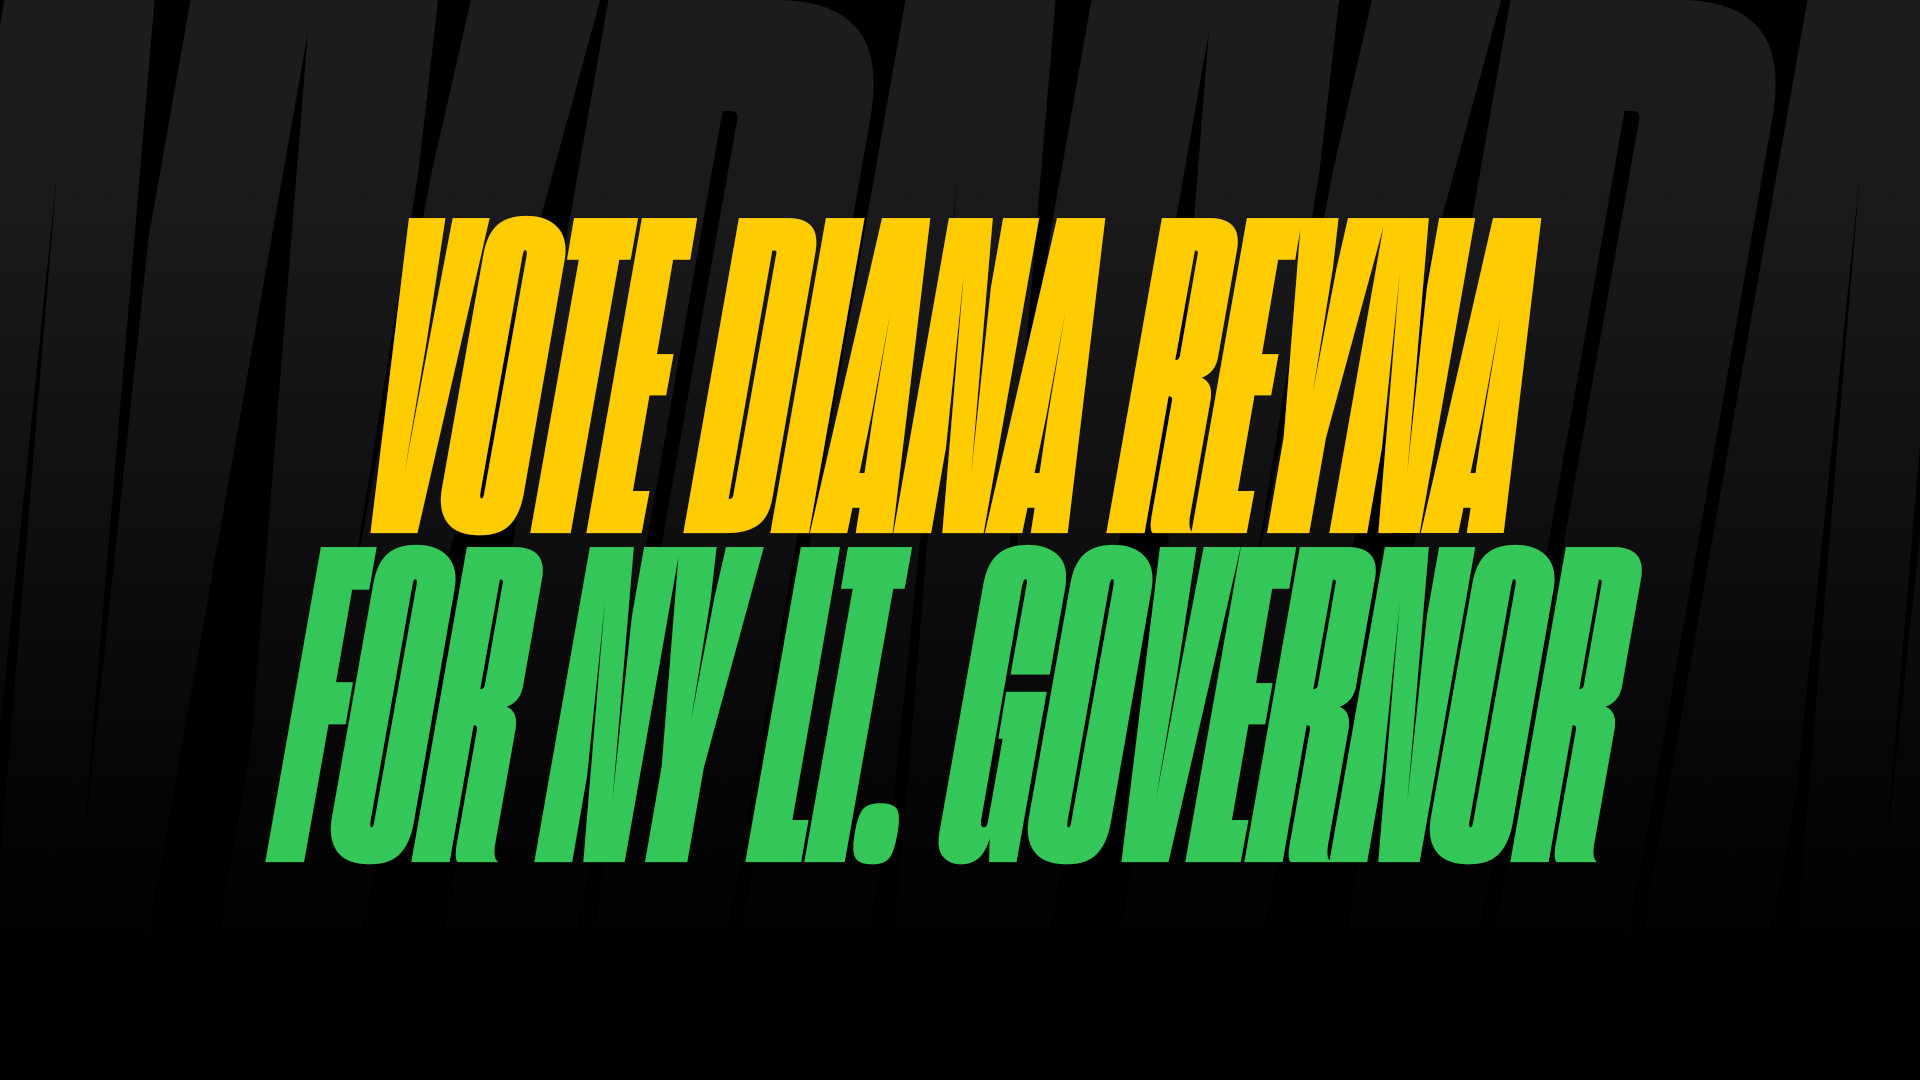 DNY Recommends Diana Reyna for New York Lieutenant Governor